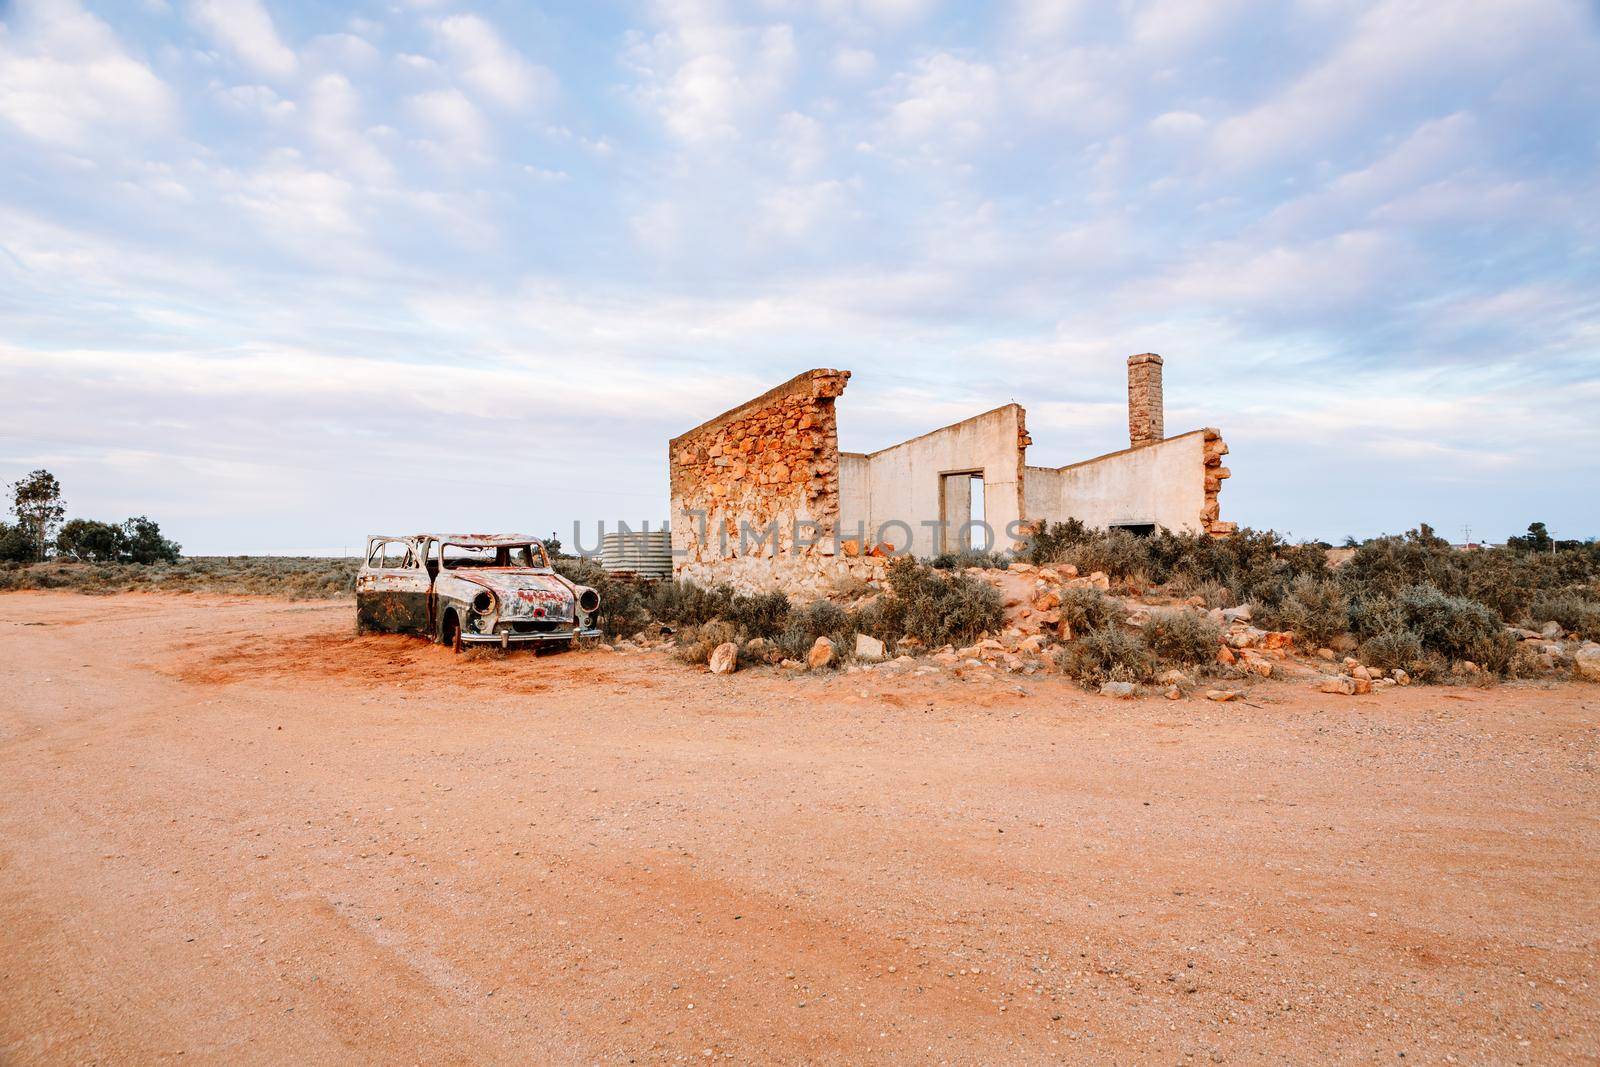 Crumbling old stone homes and rusting cars in outback Australia by lovleah